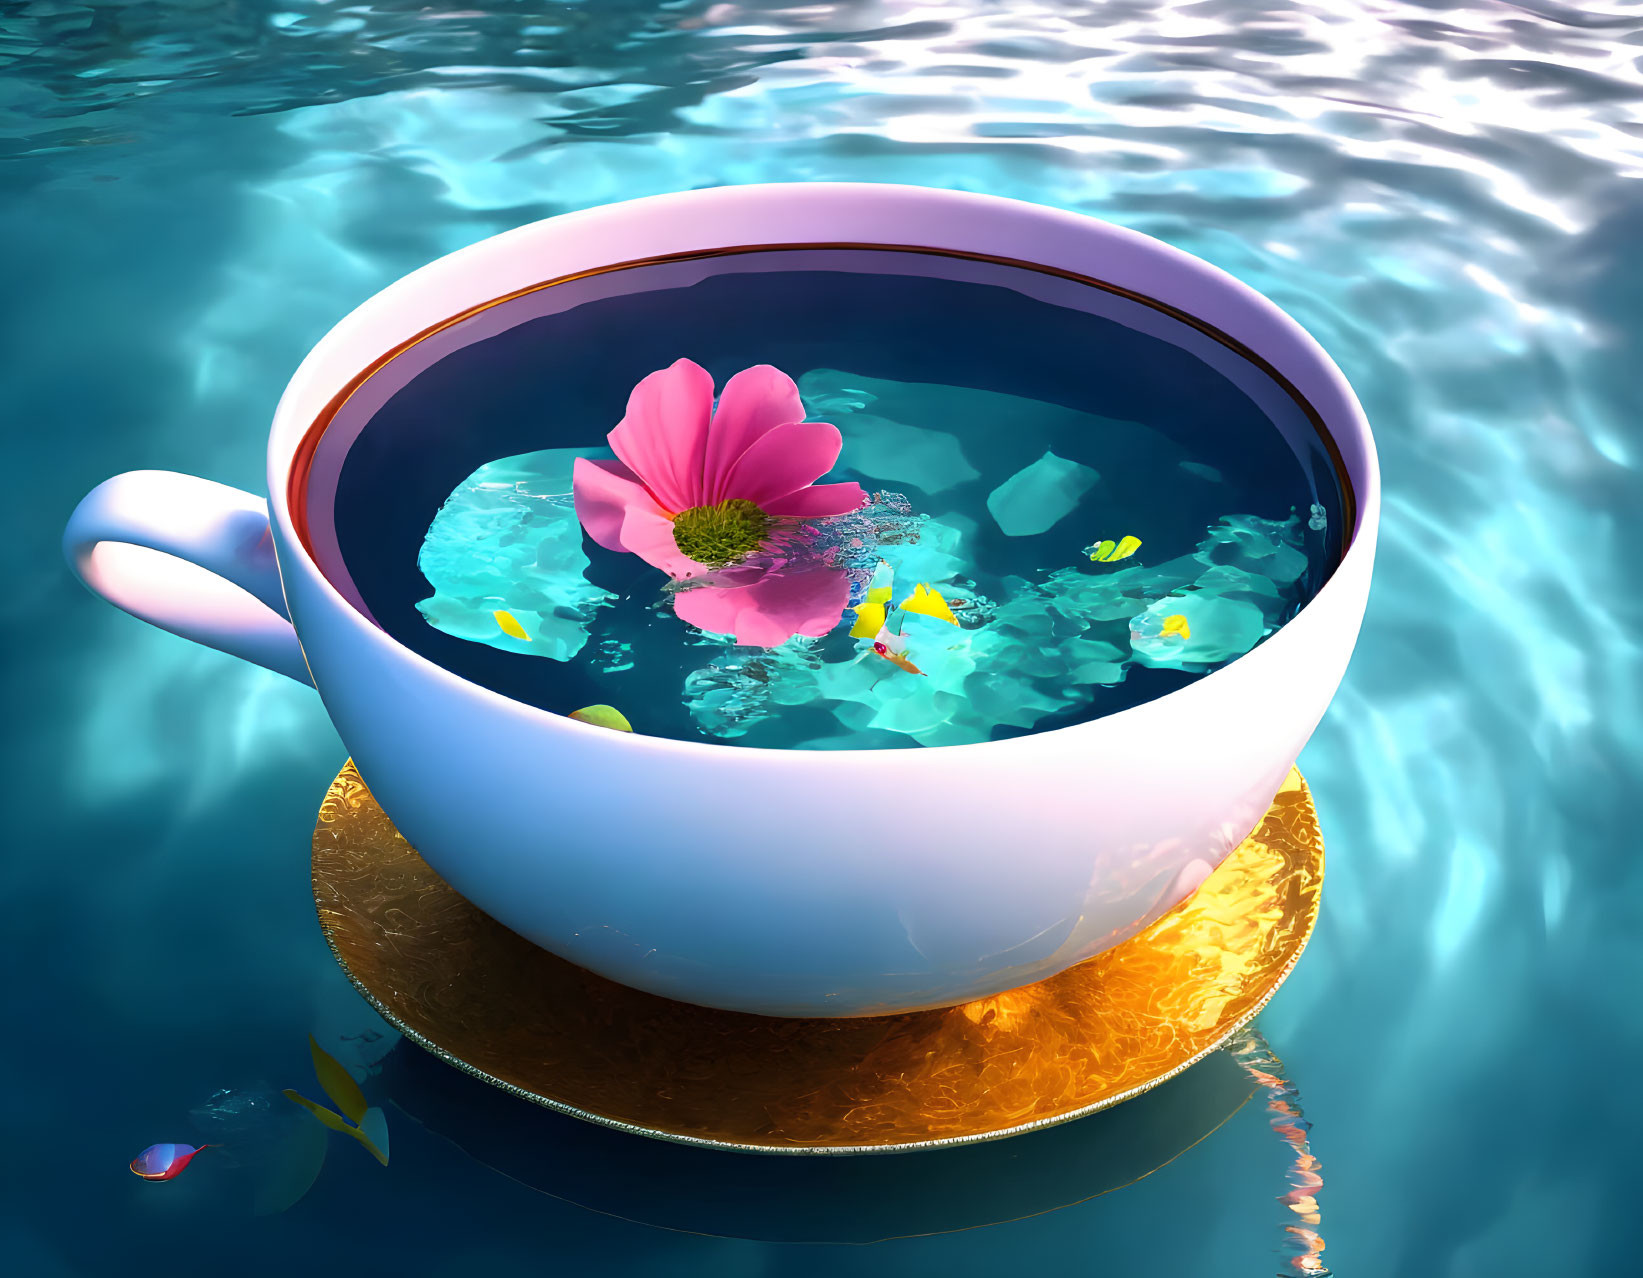 pool in a cup